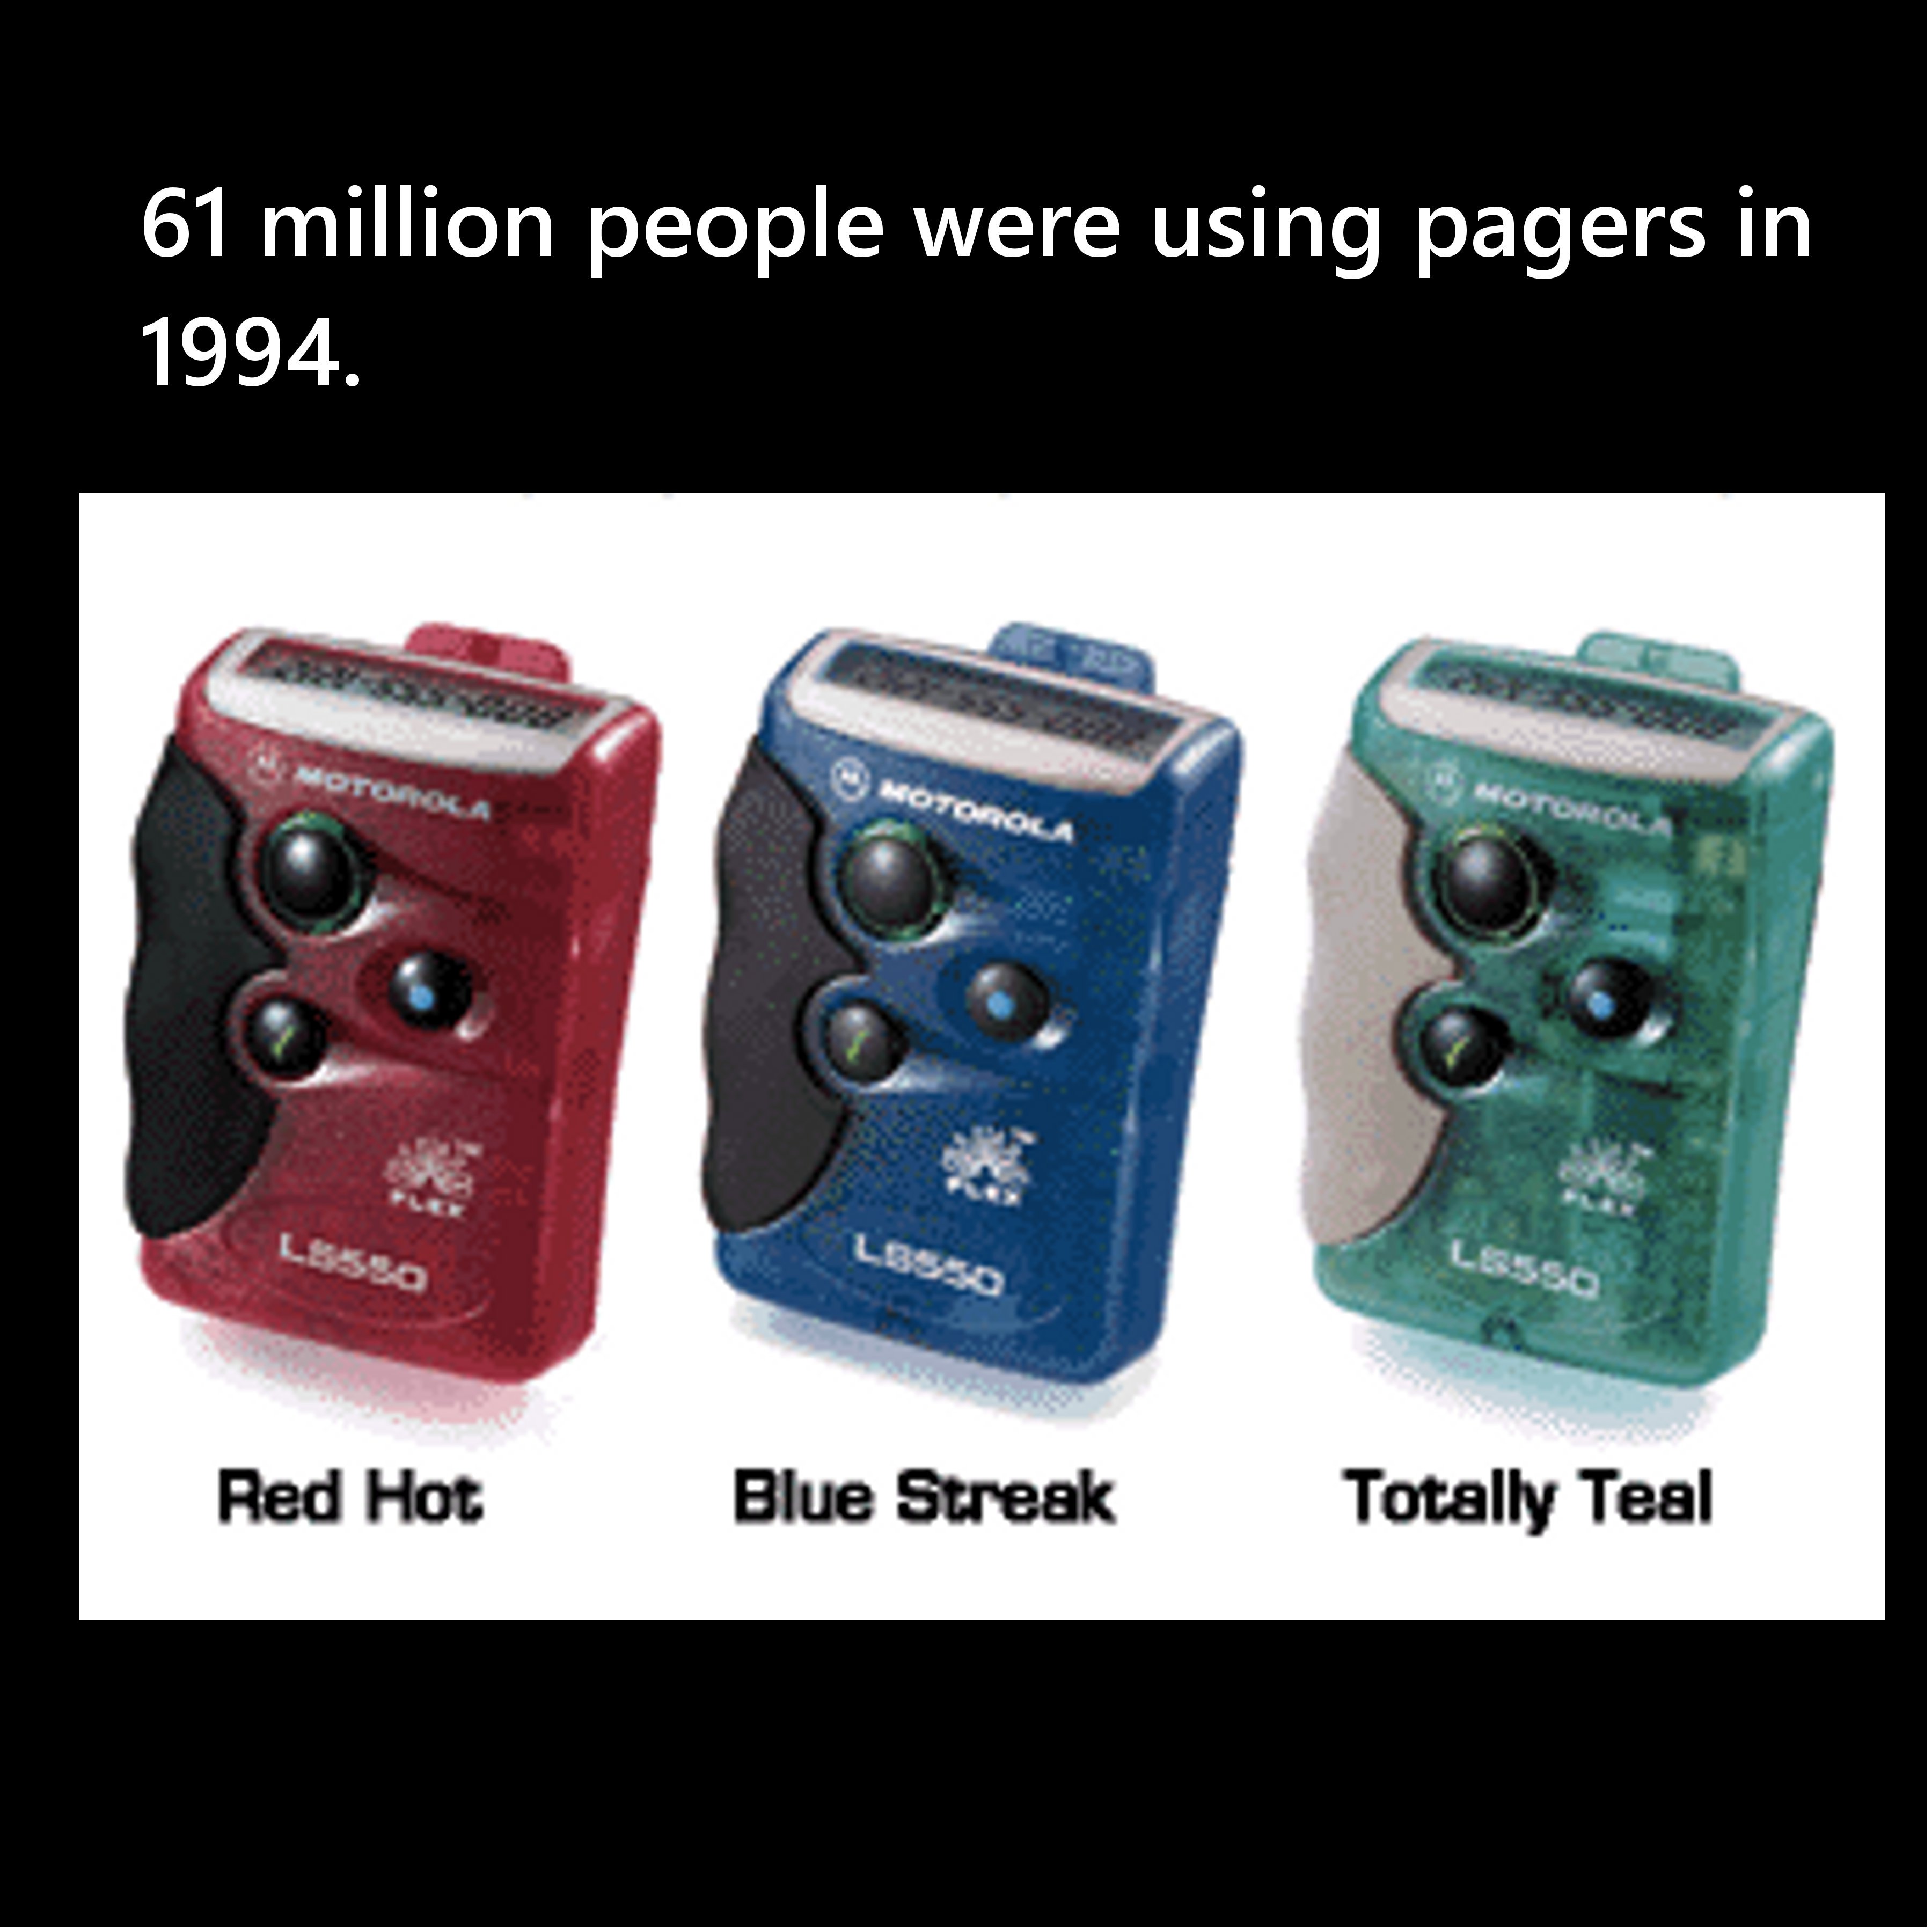 game controller - 61 million people were using pagers in 1994. Motorola Lusso Red Hot Blue Streak Totally Teal